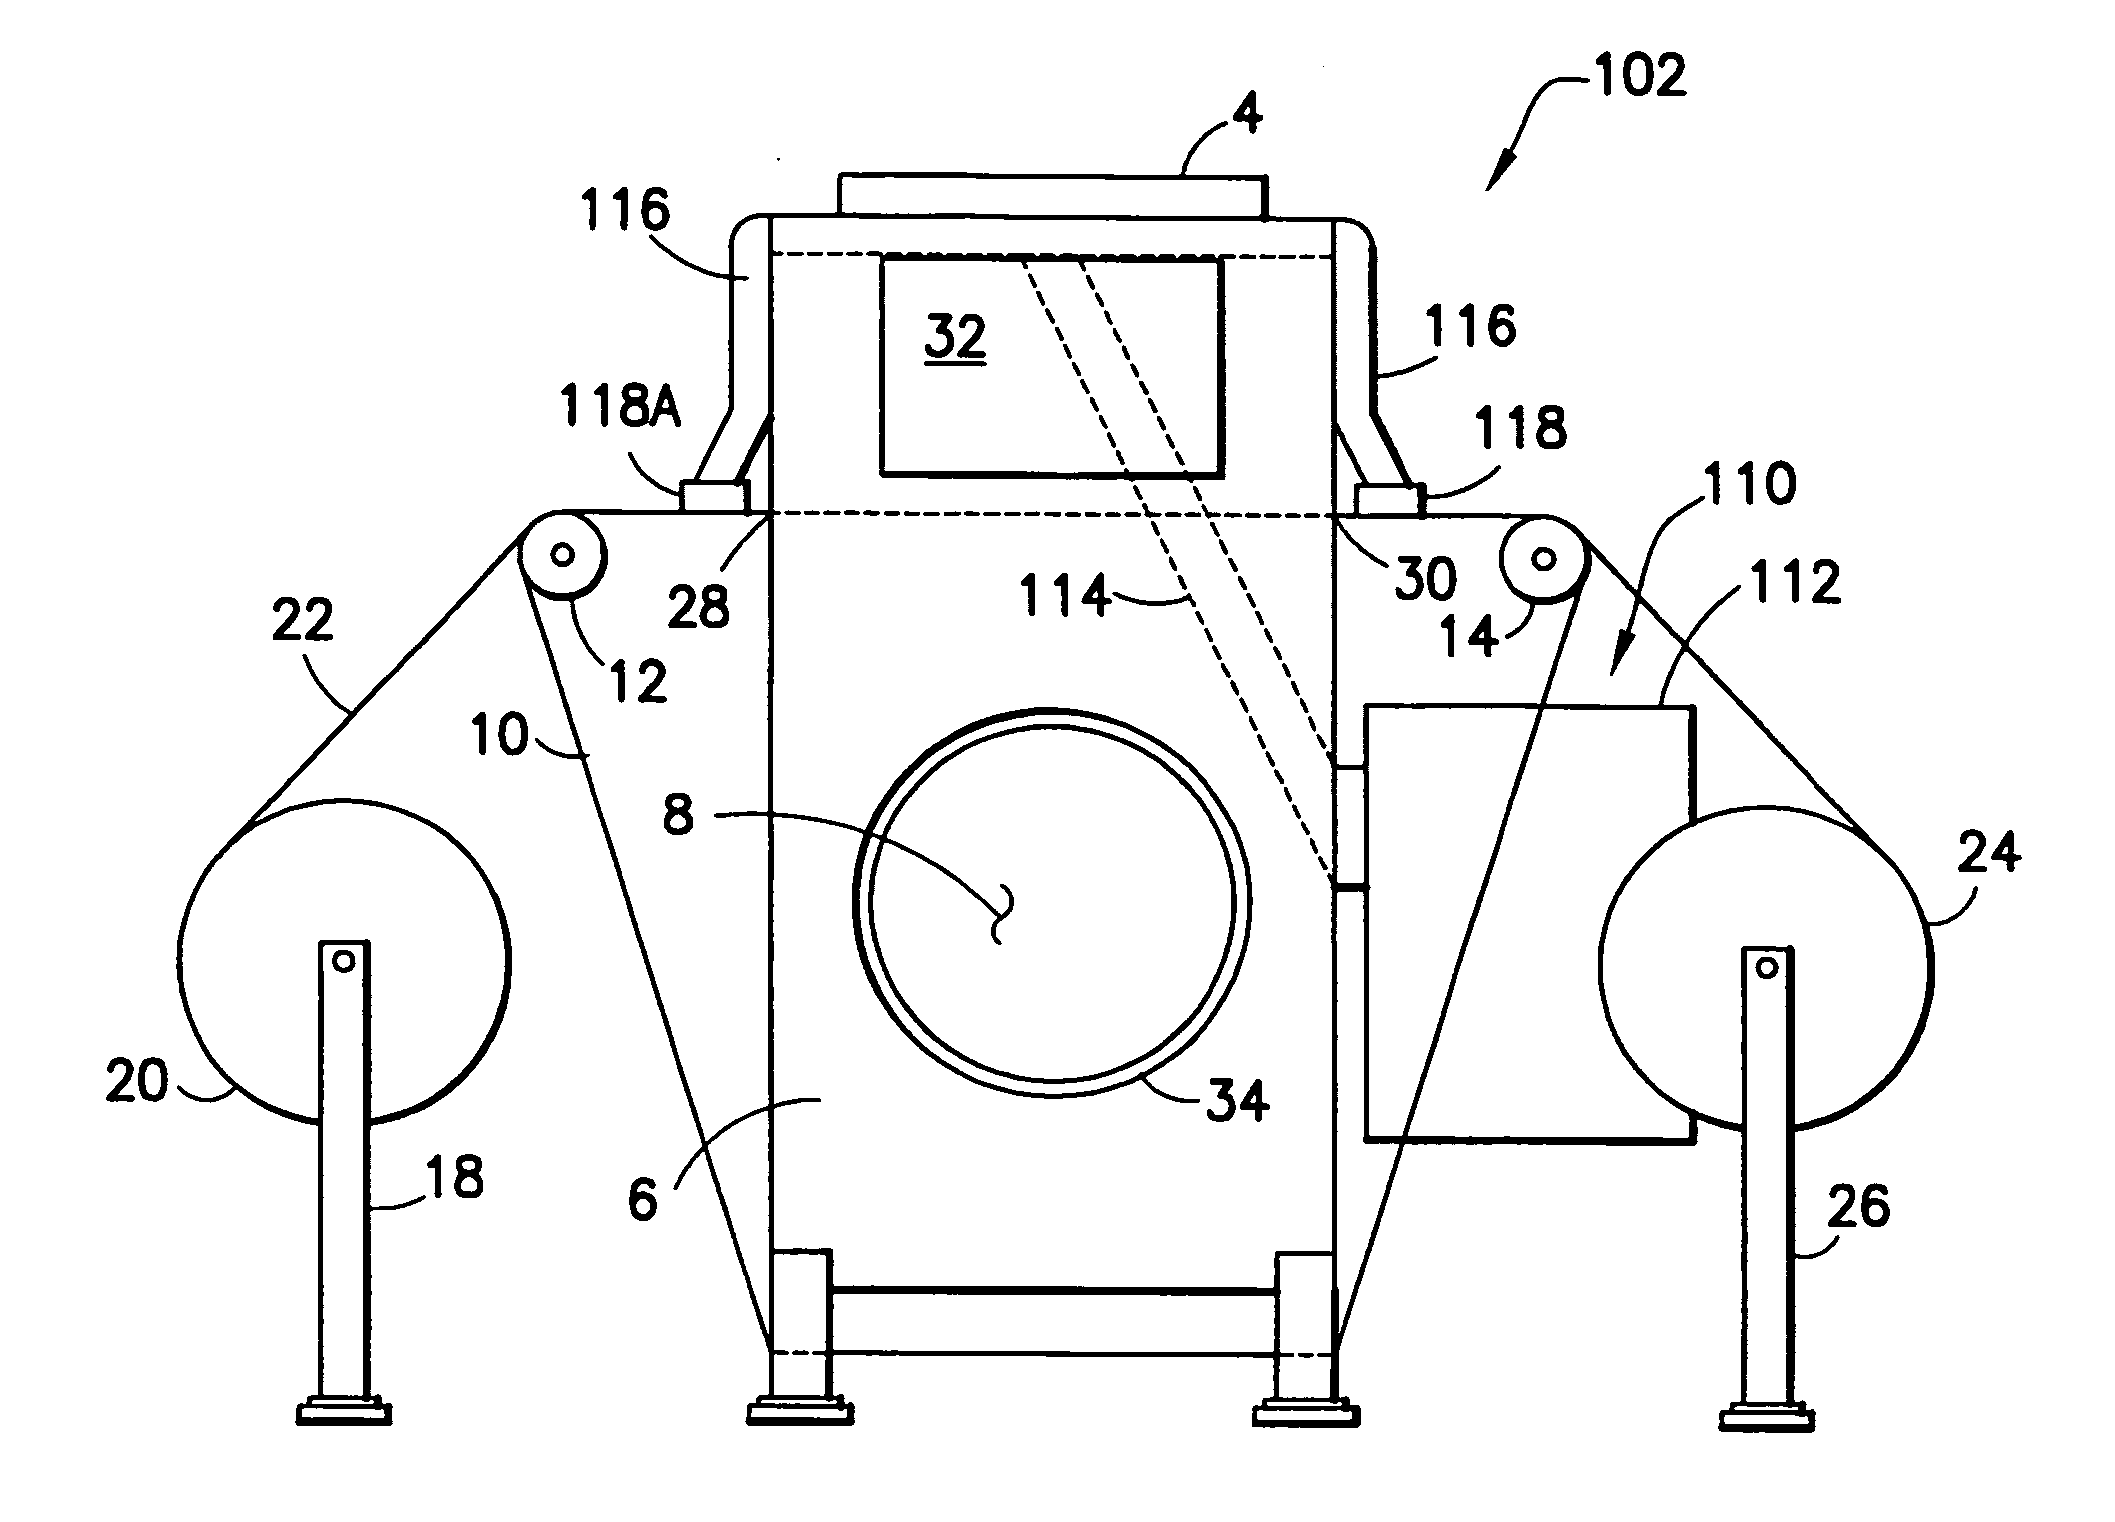 Apparatus and method for removing contaminants from a gas stream